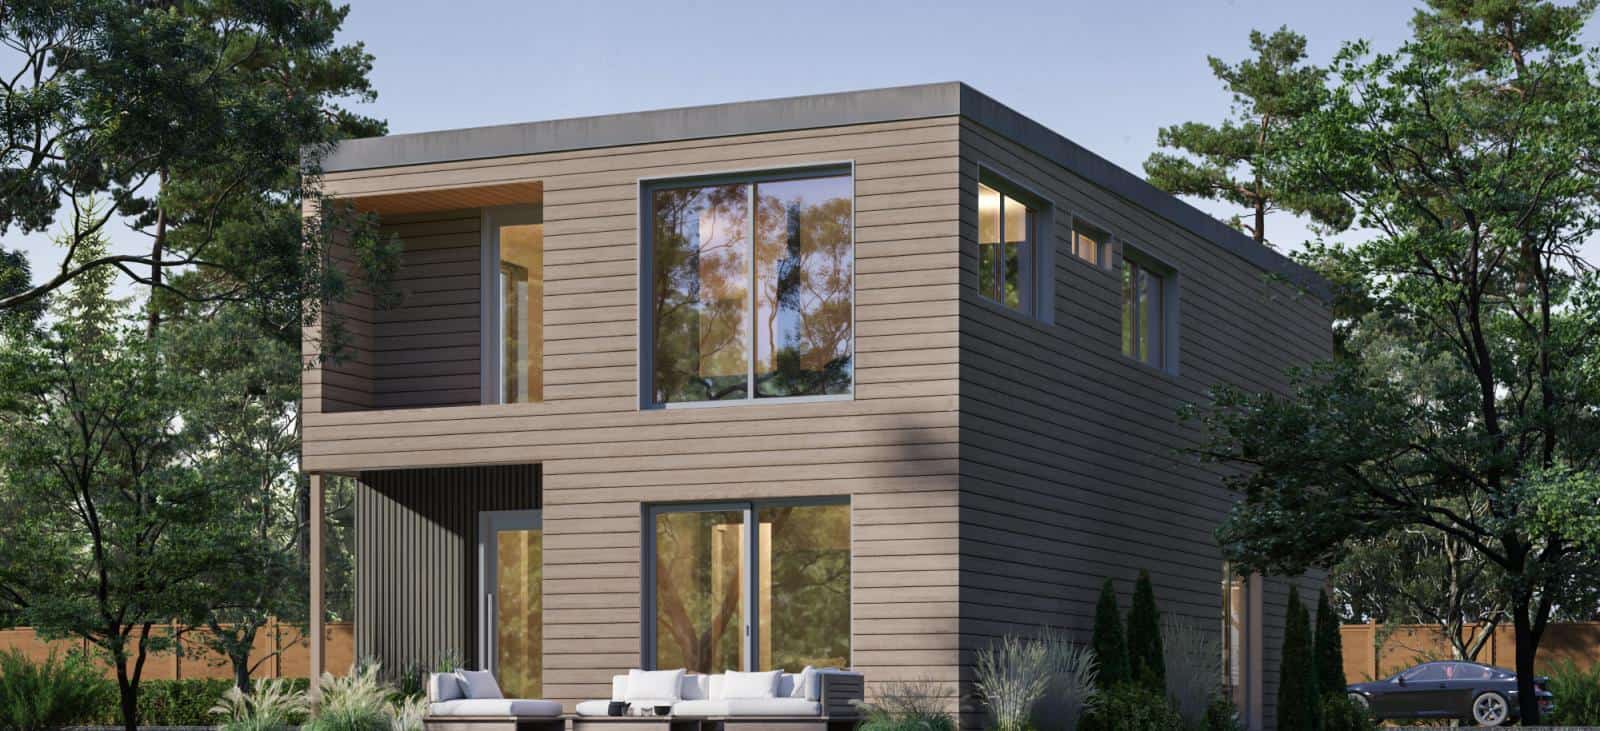 Harper prefab home by Dvele rear exterior with large deck.